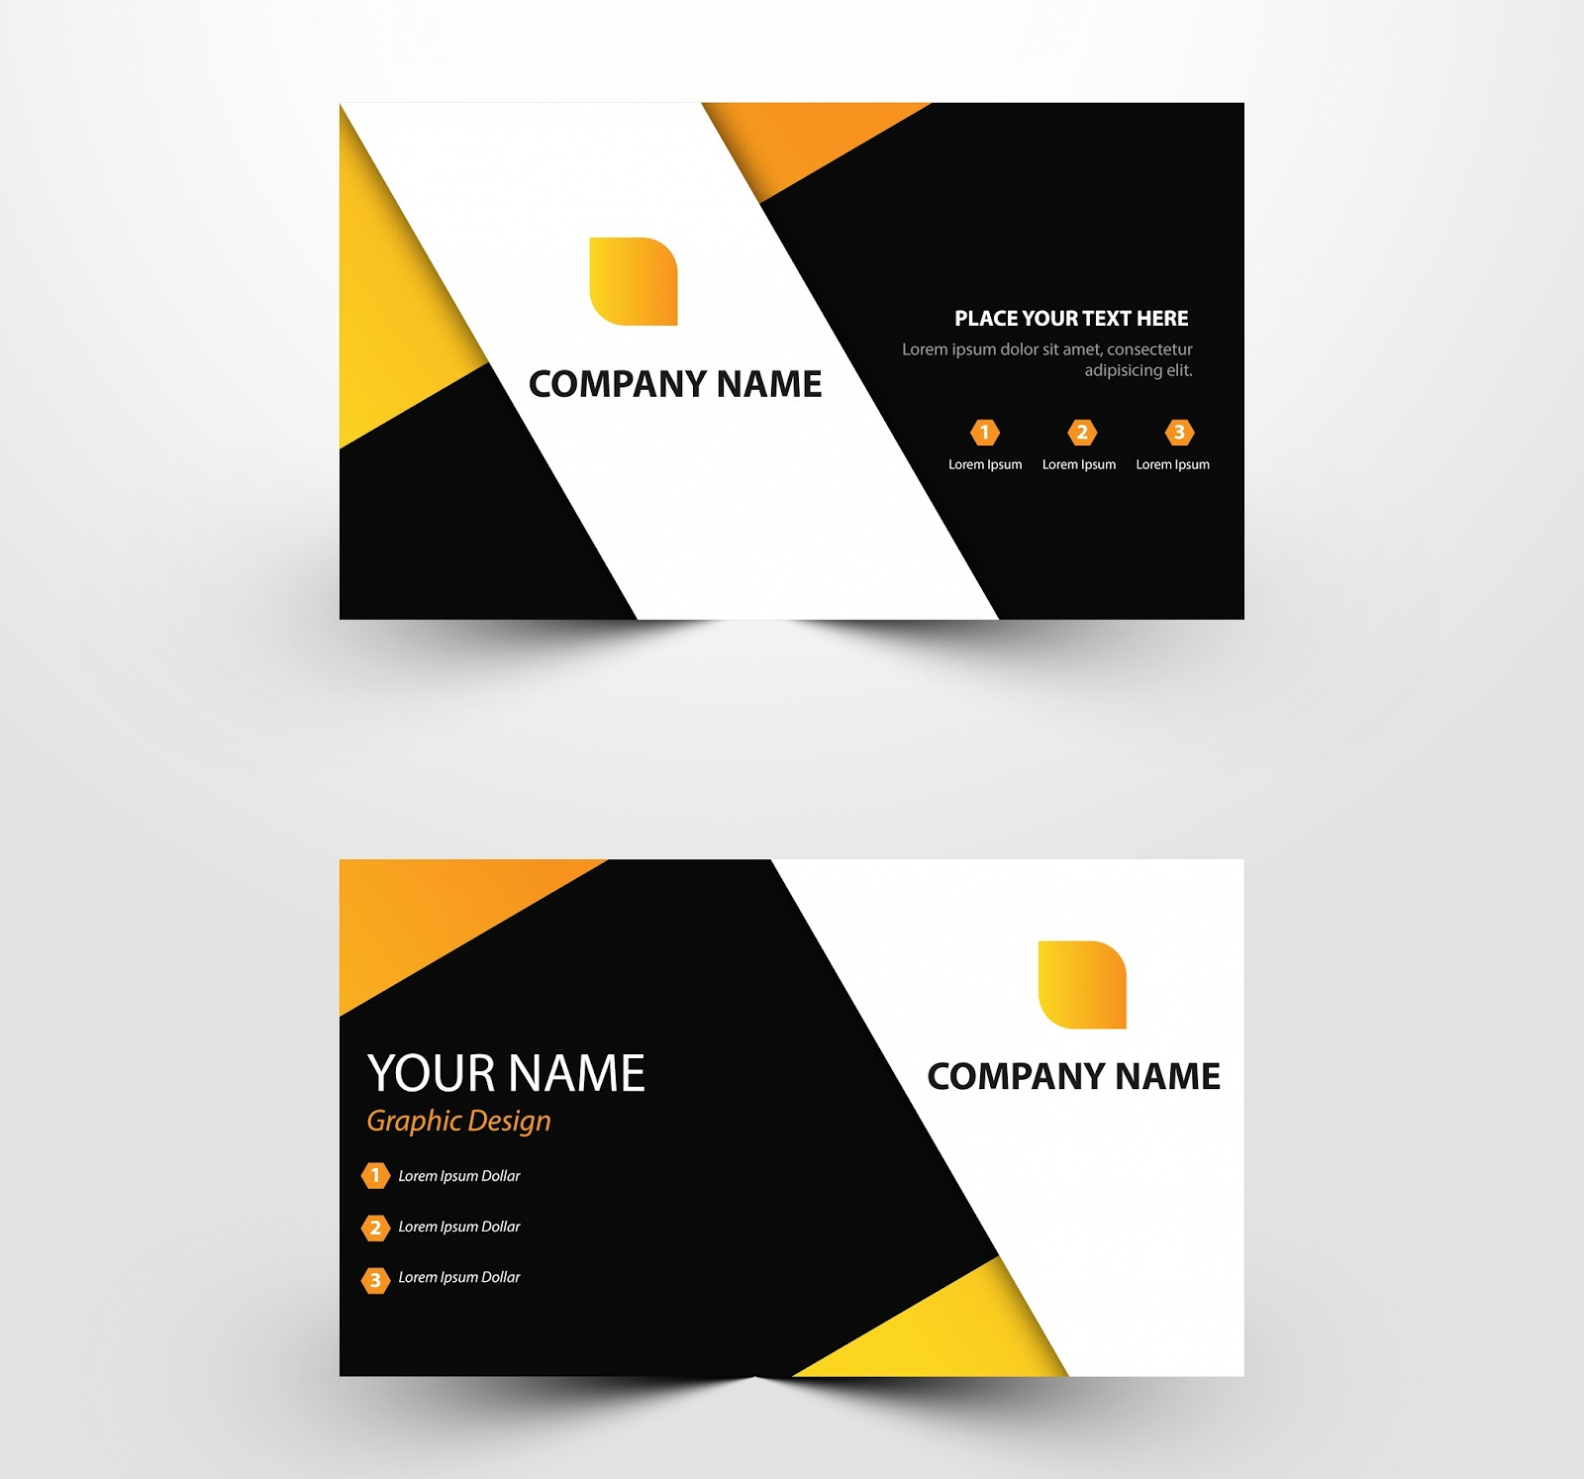 Adobe Photoshop Business Card Template